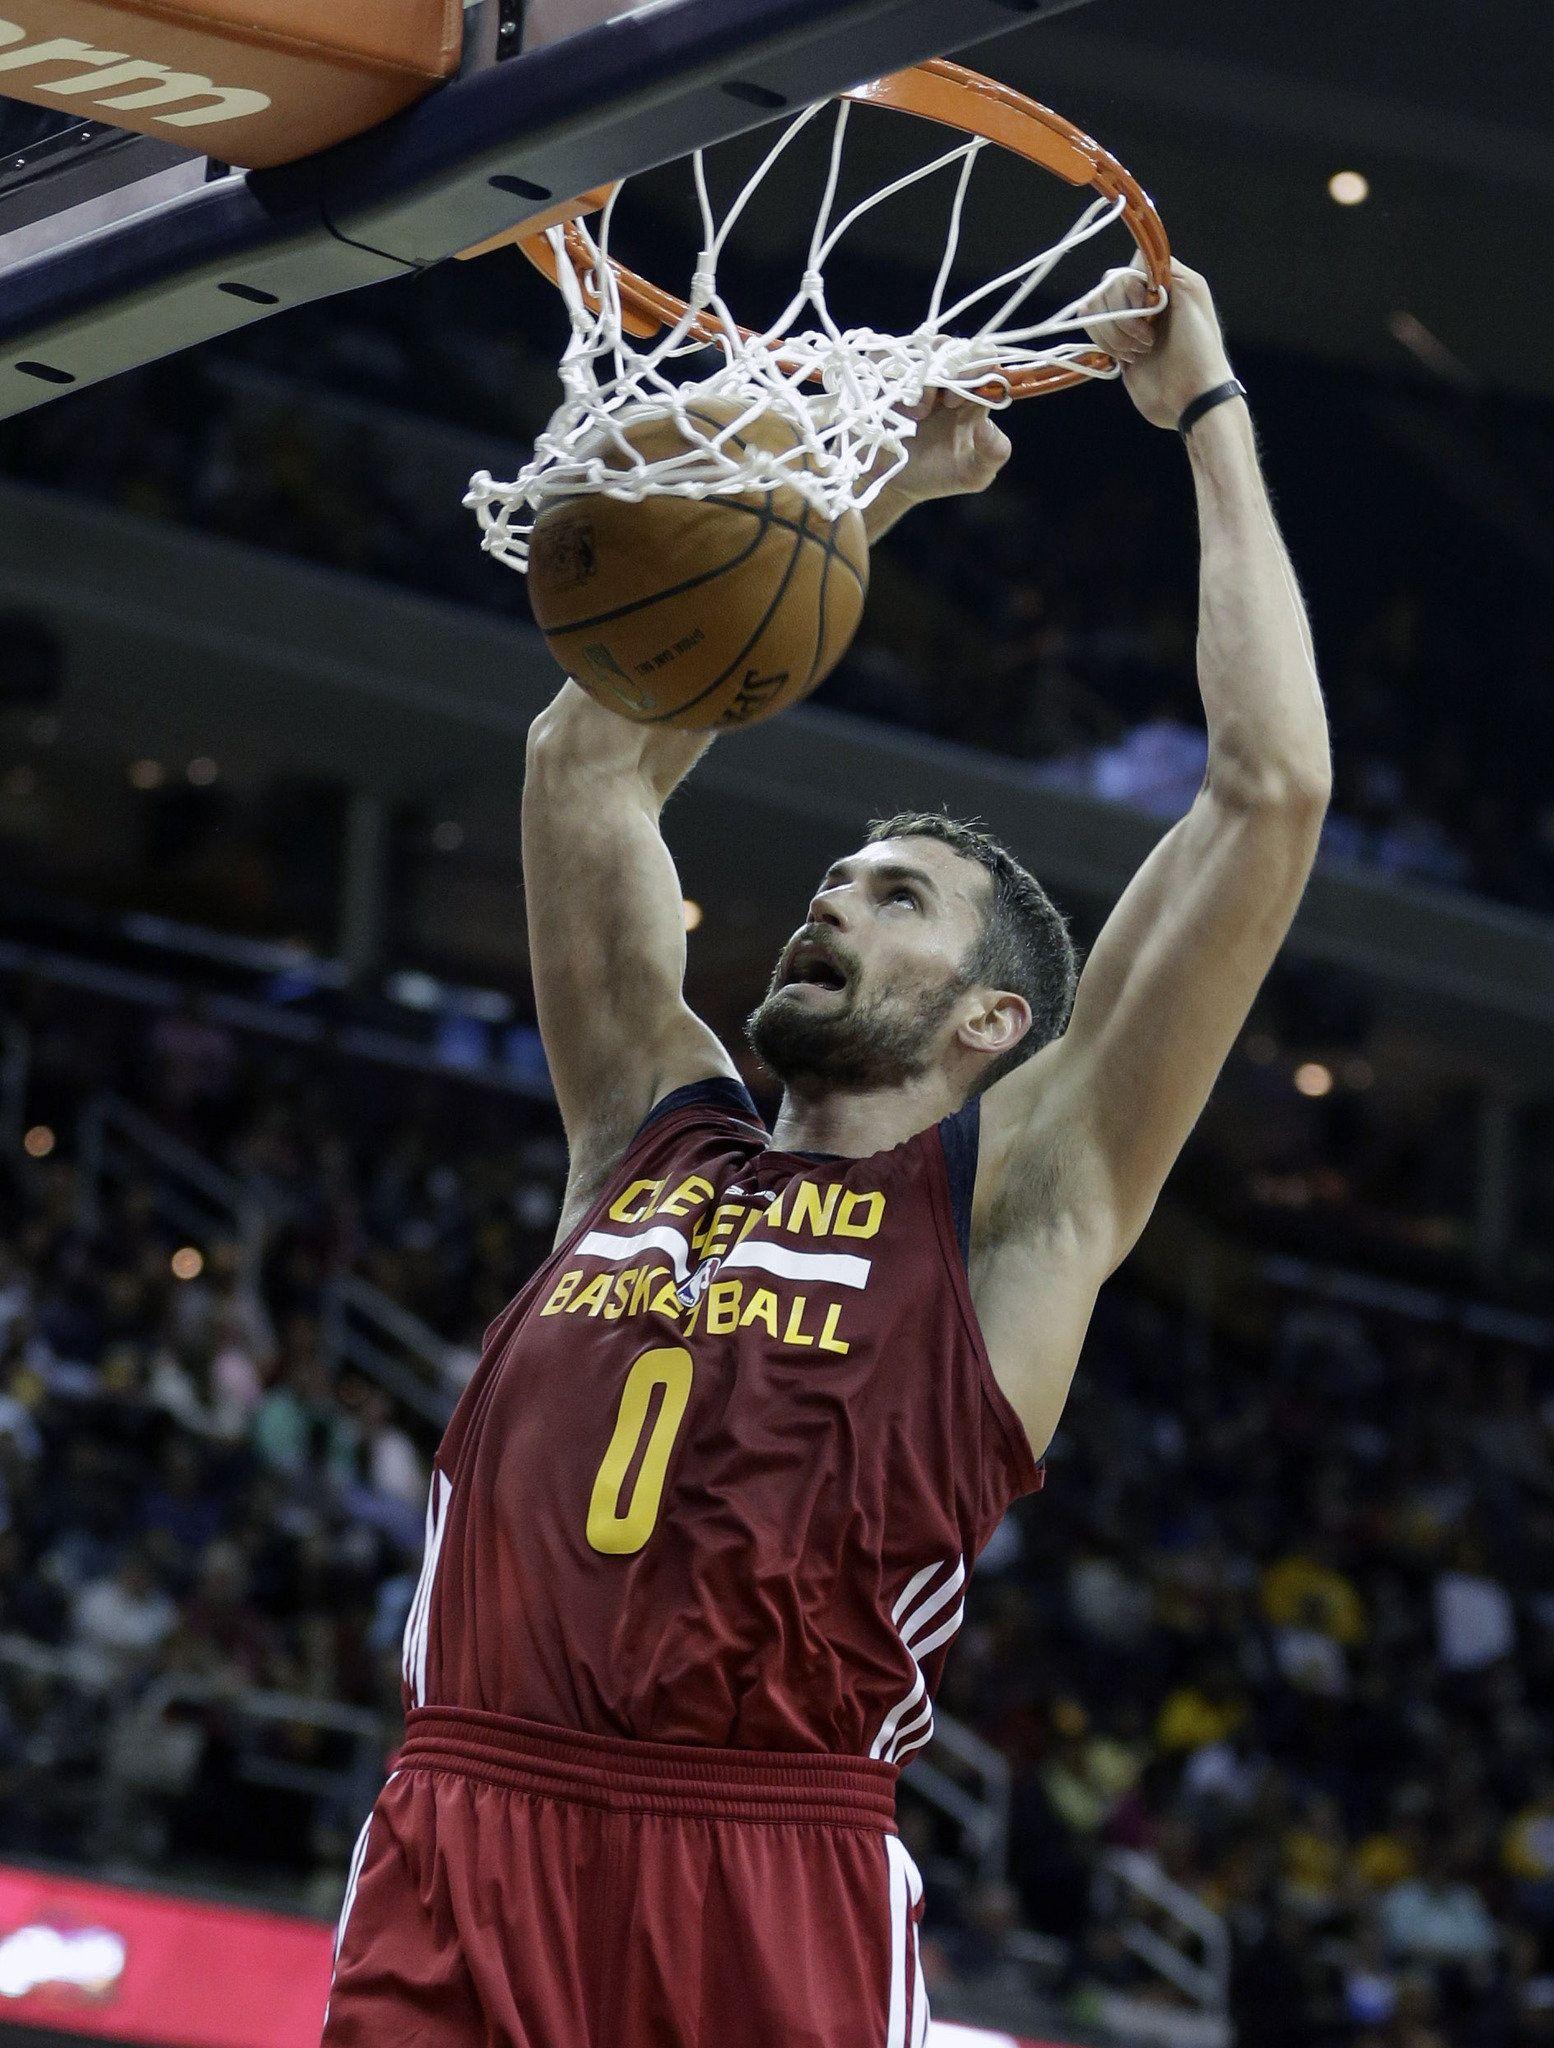 With Kevin Love's passes, the Cleveland Cavaliers will have